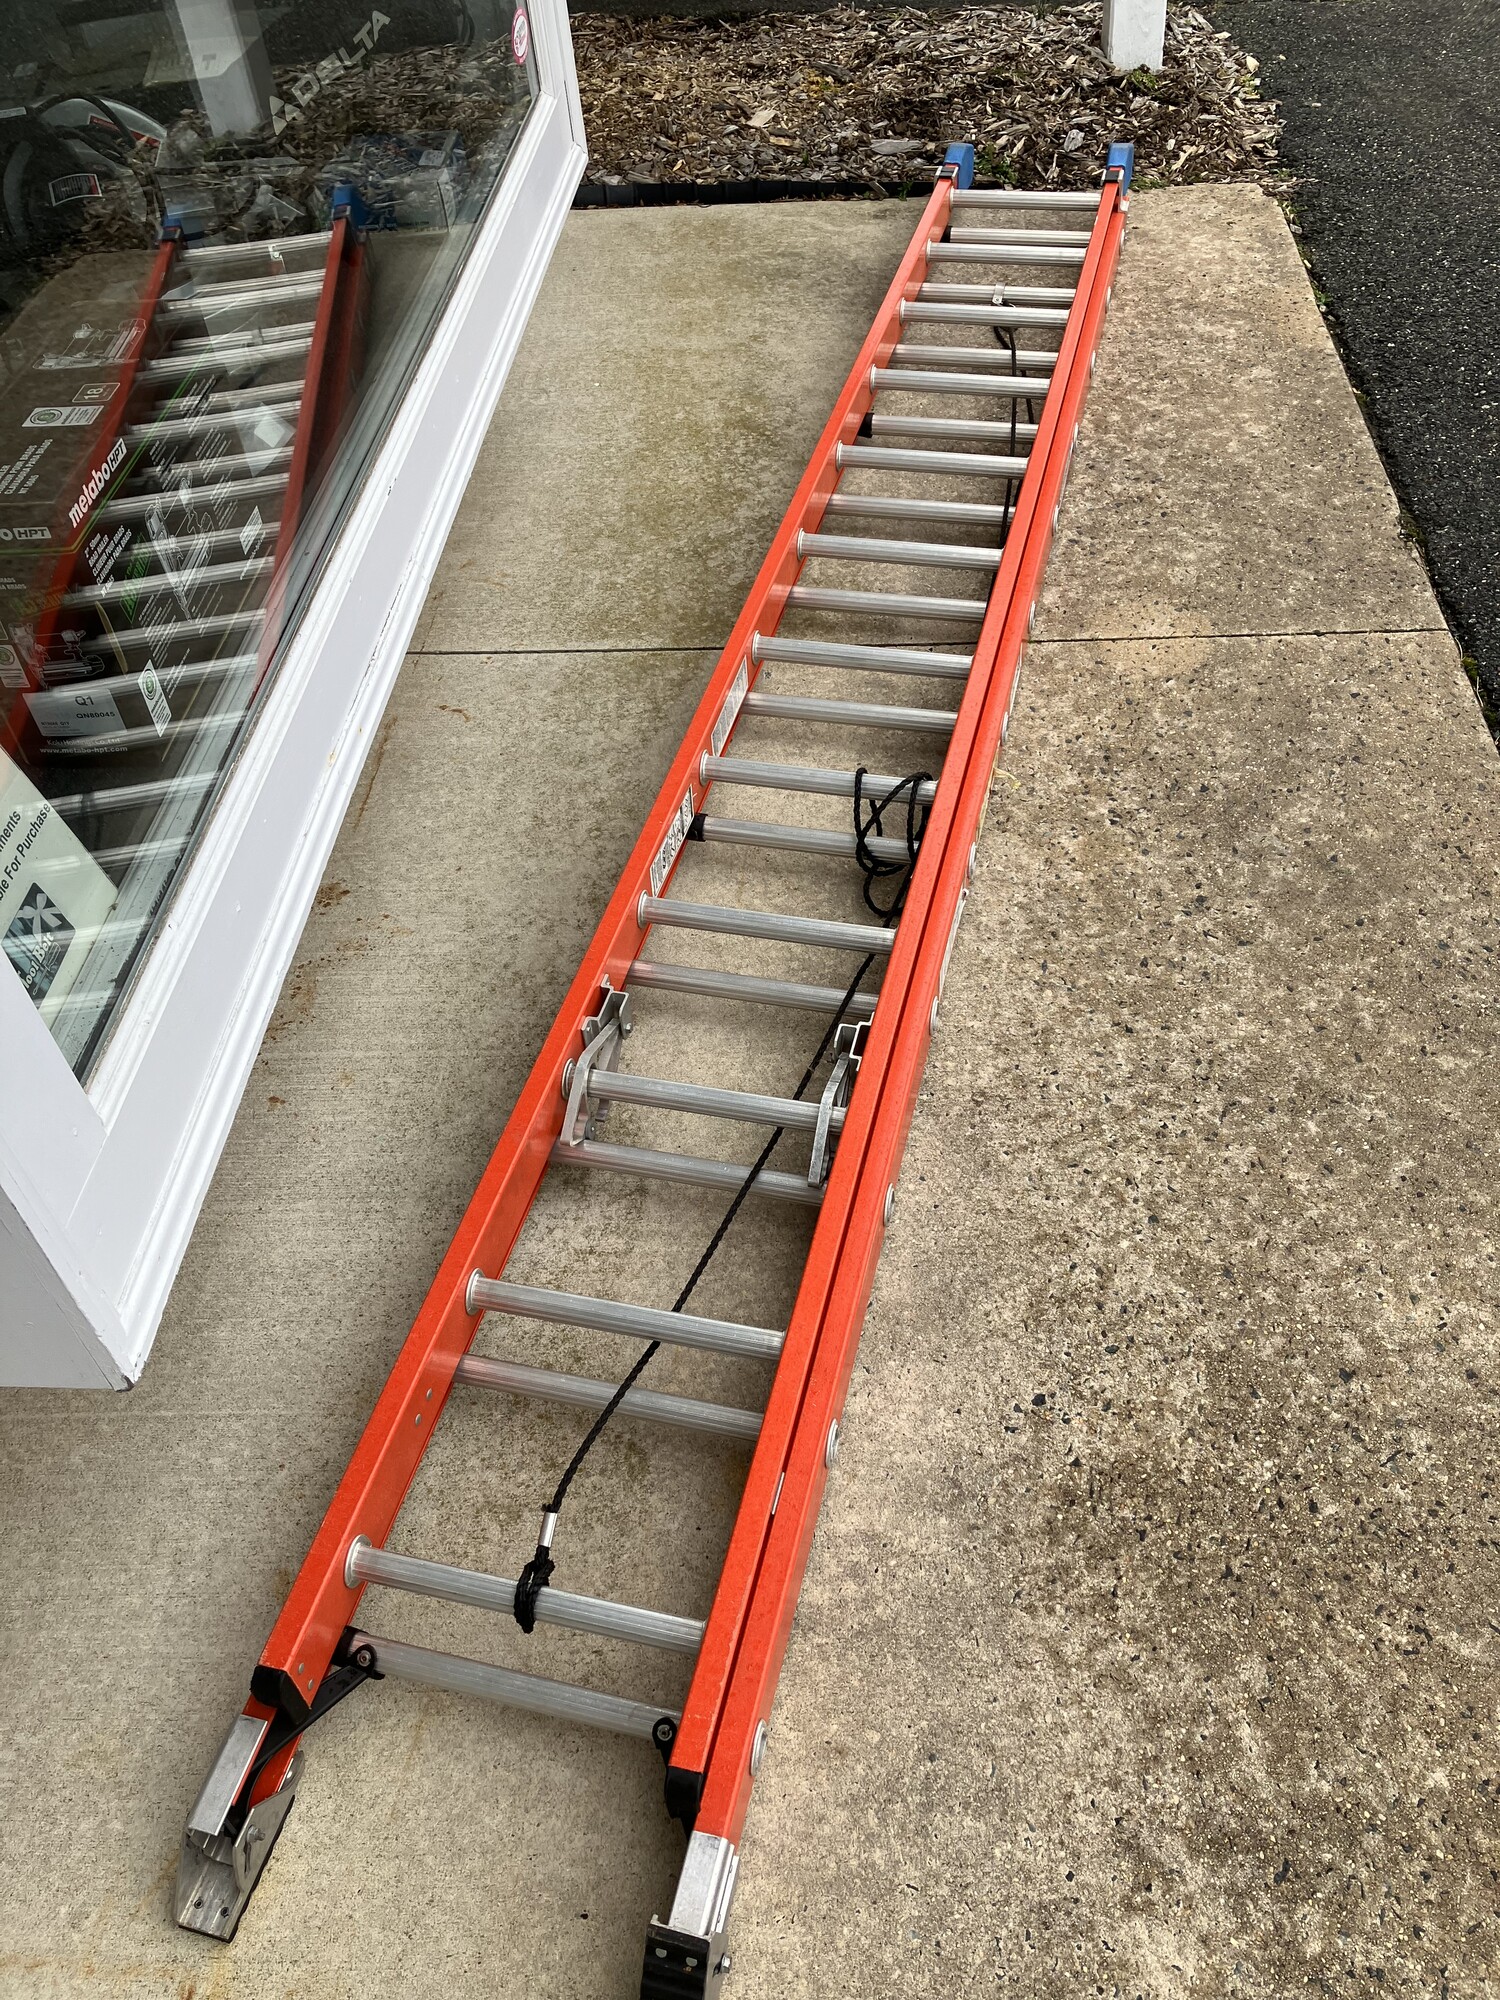 24 ft Extension Ladder, Werner, Fiberglass
Size: 300lb

Like New Condition